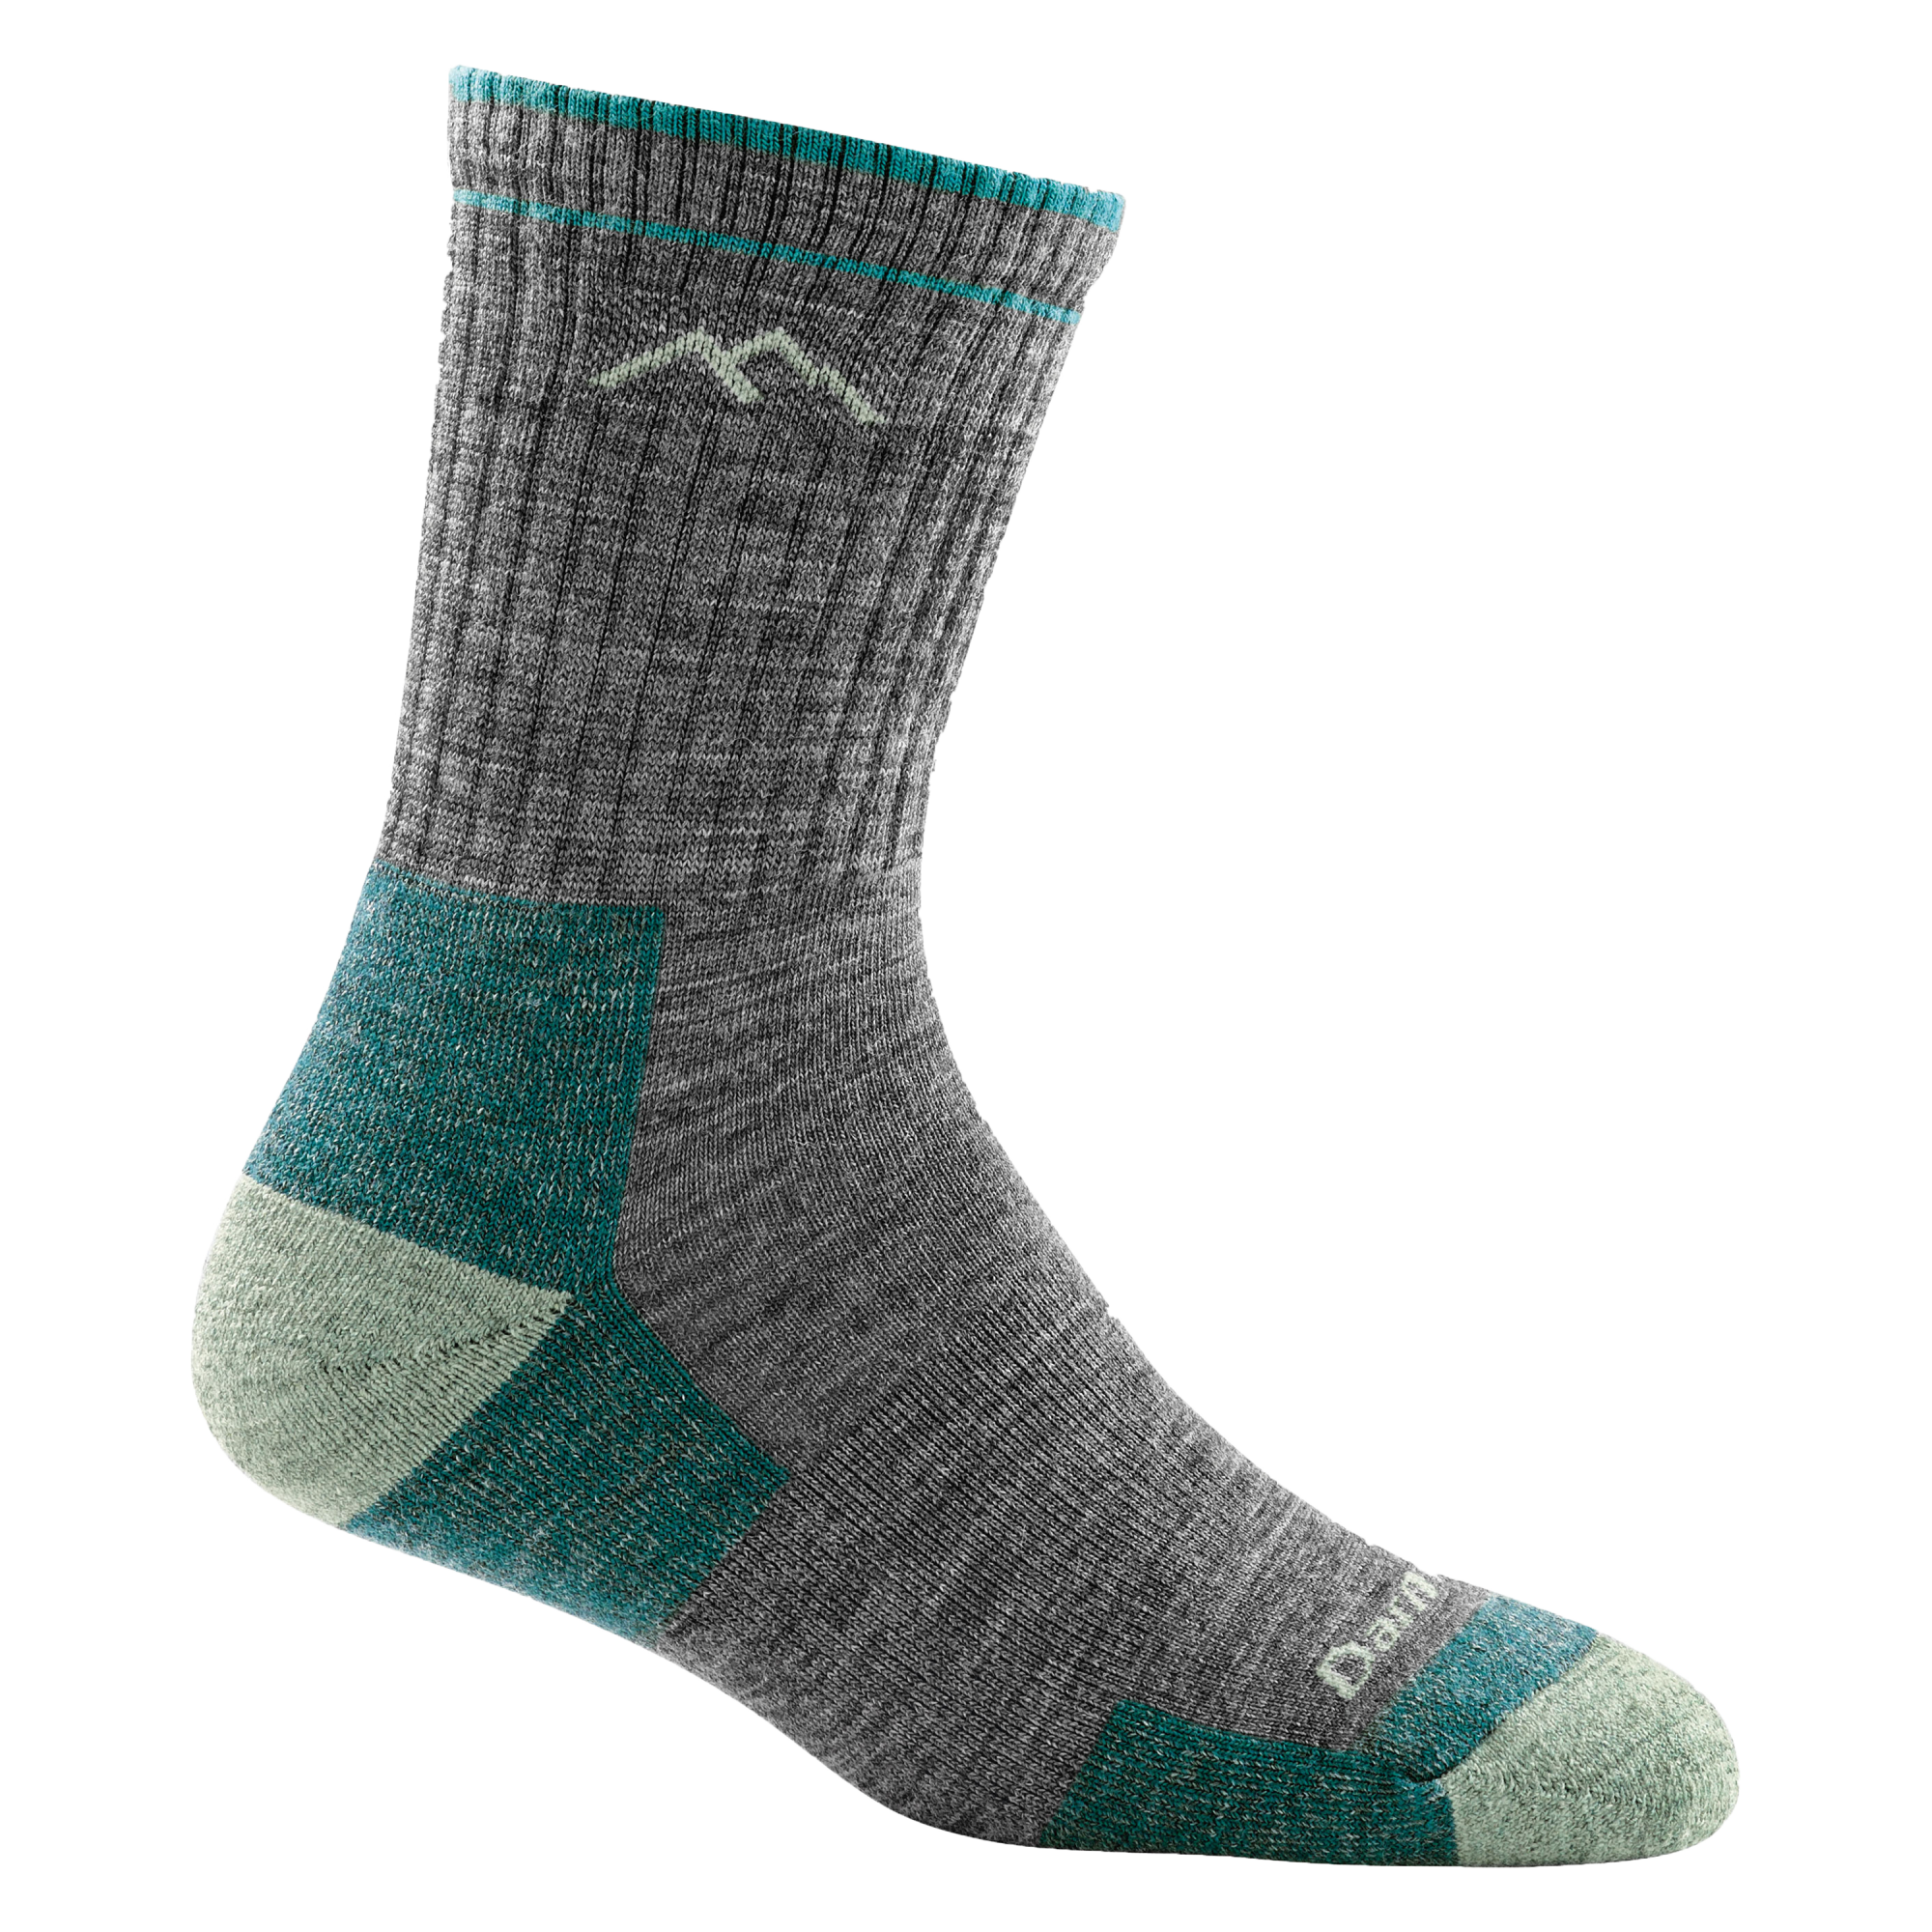 Closep detail shot of the Women's Hiker Micro Crew Midweight Hiking Sock in Slate with seafoam and dark teal accents